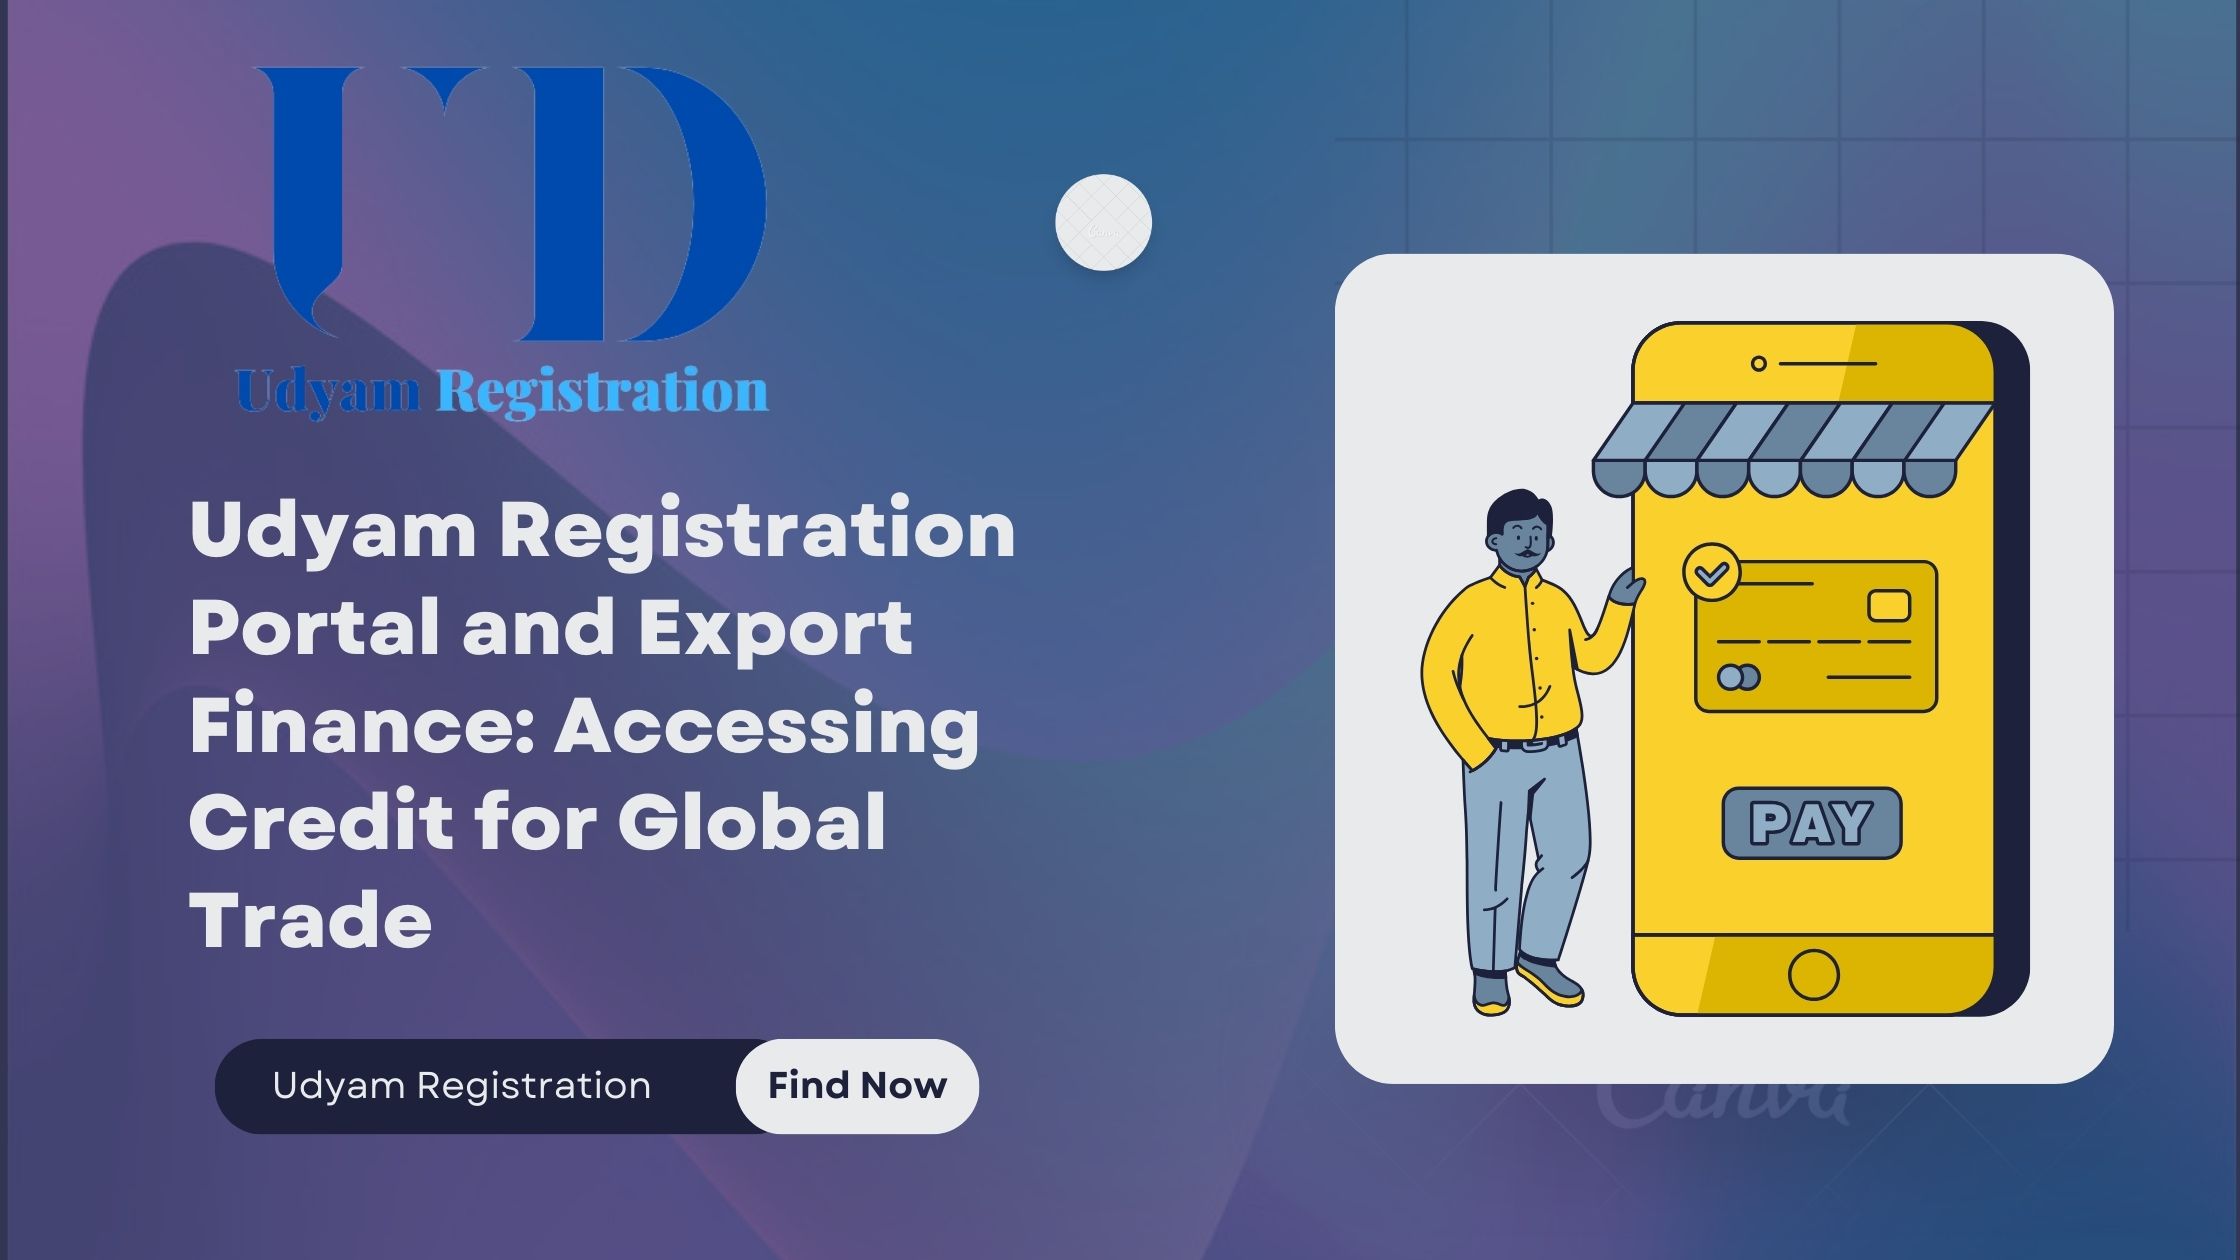 Udyam Registration Portal and Export Finance: Accessing Credit for Global Trade